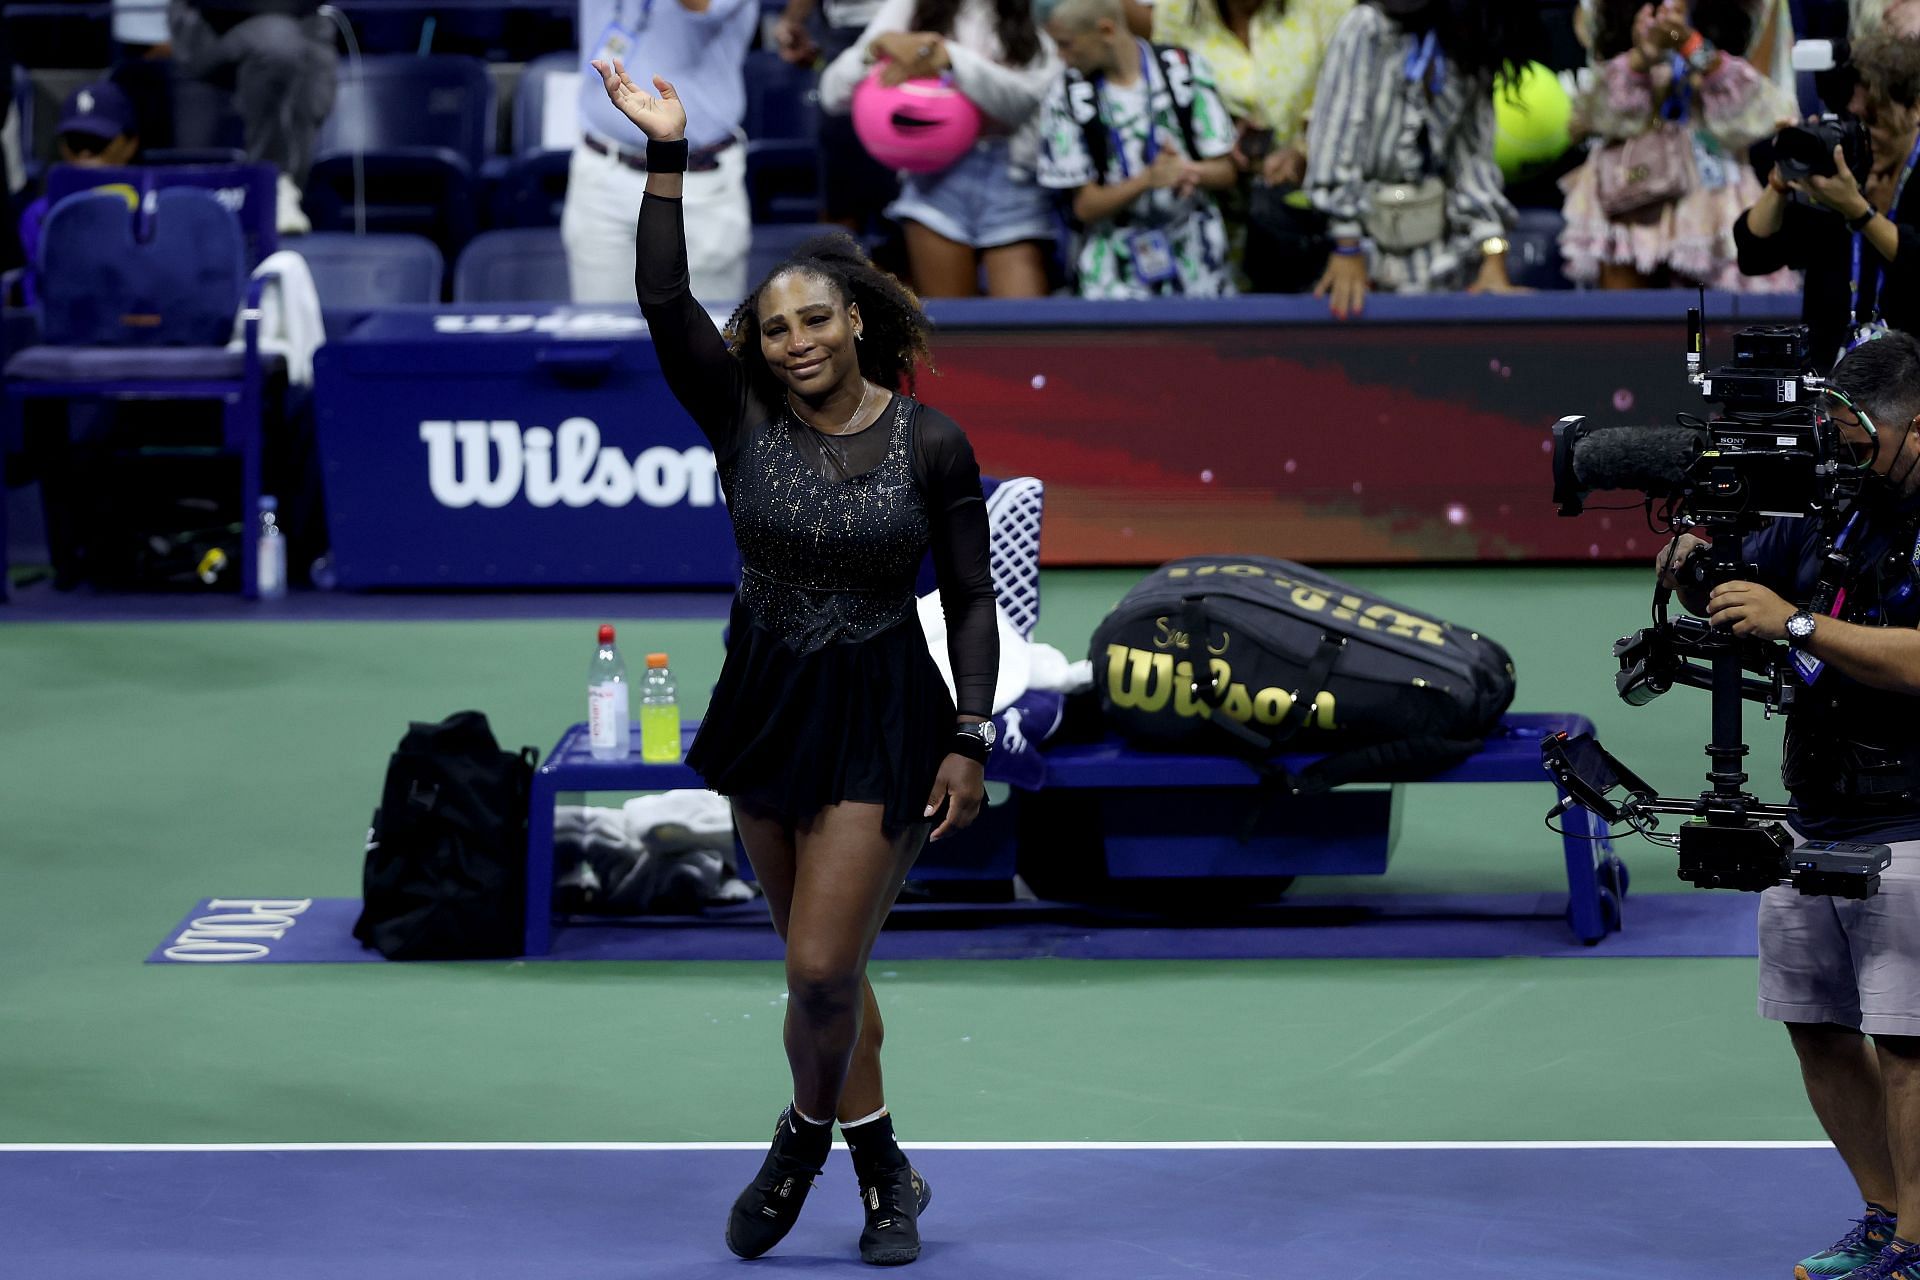 Serena Williams after her final match at the US Open